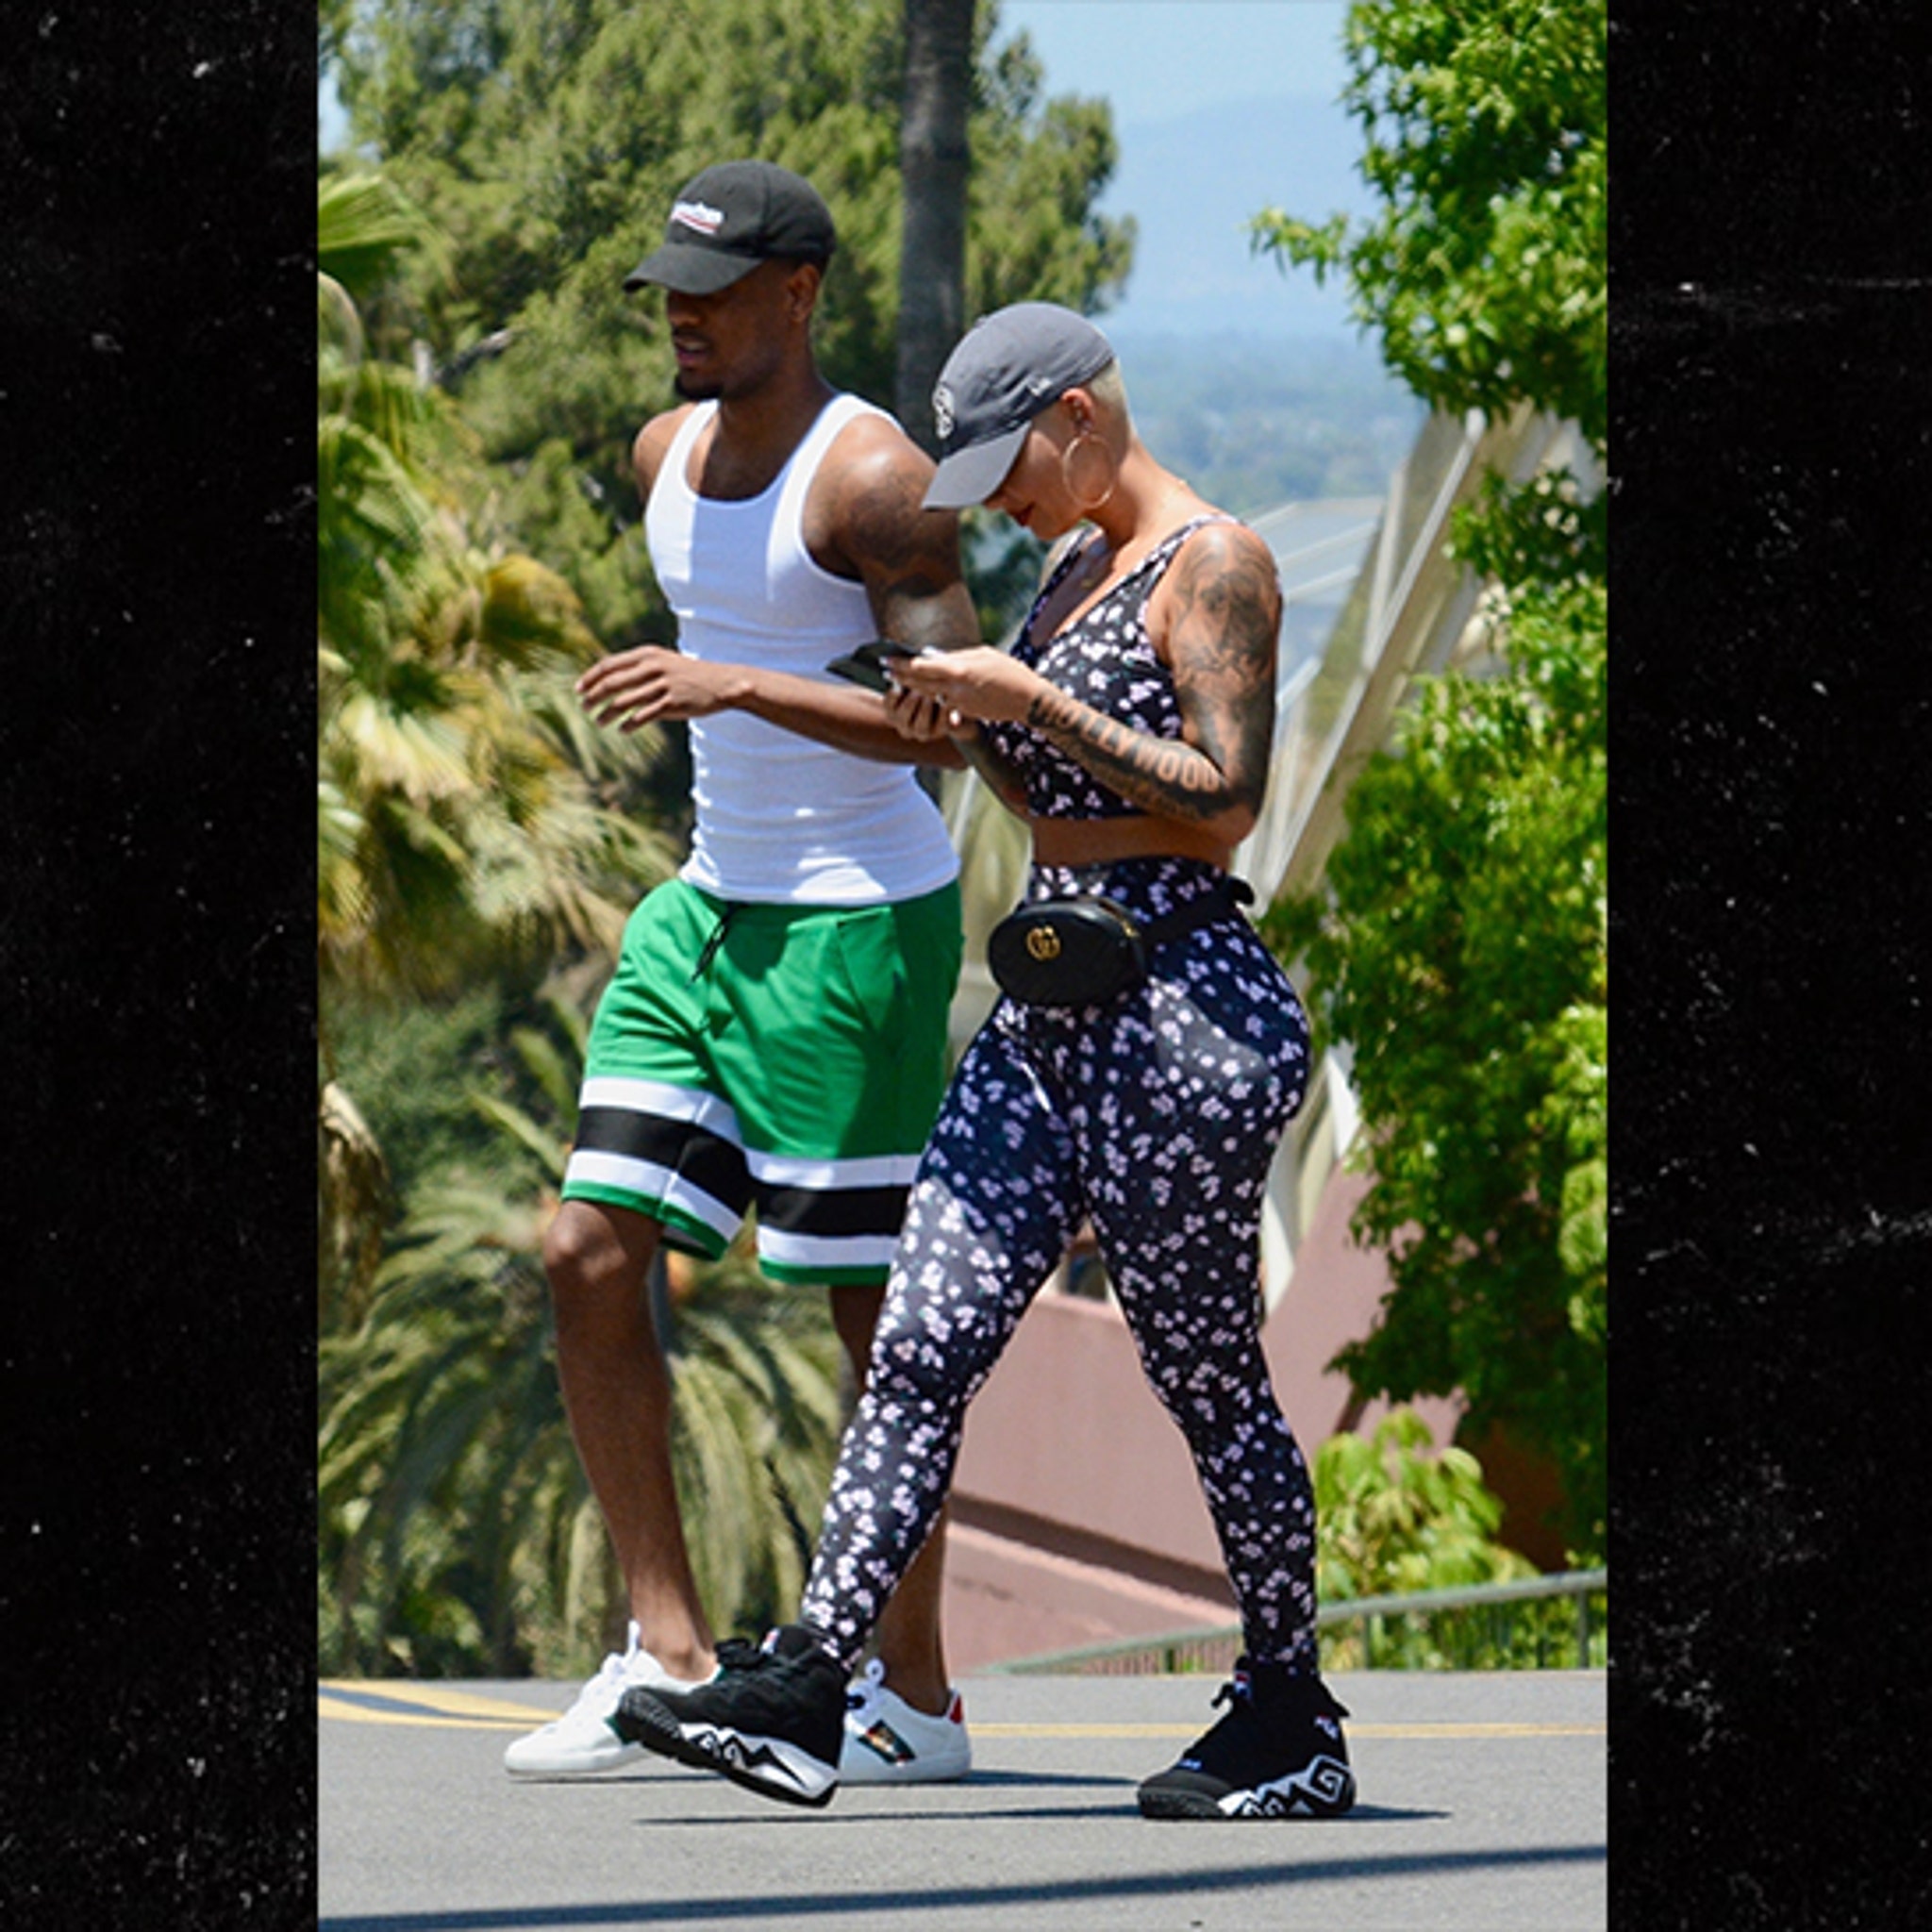 It Seems Amber Rose Is Dating Nuggets Guard Monte Morris